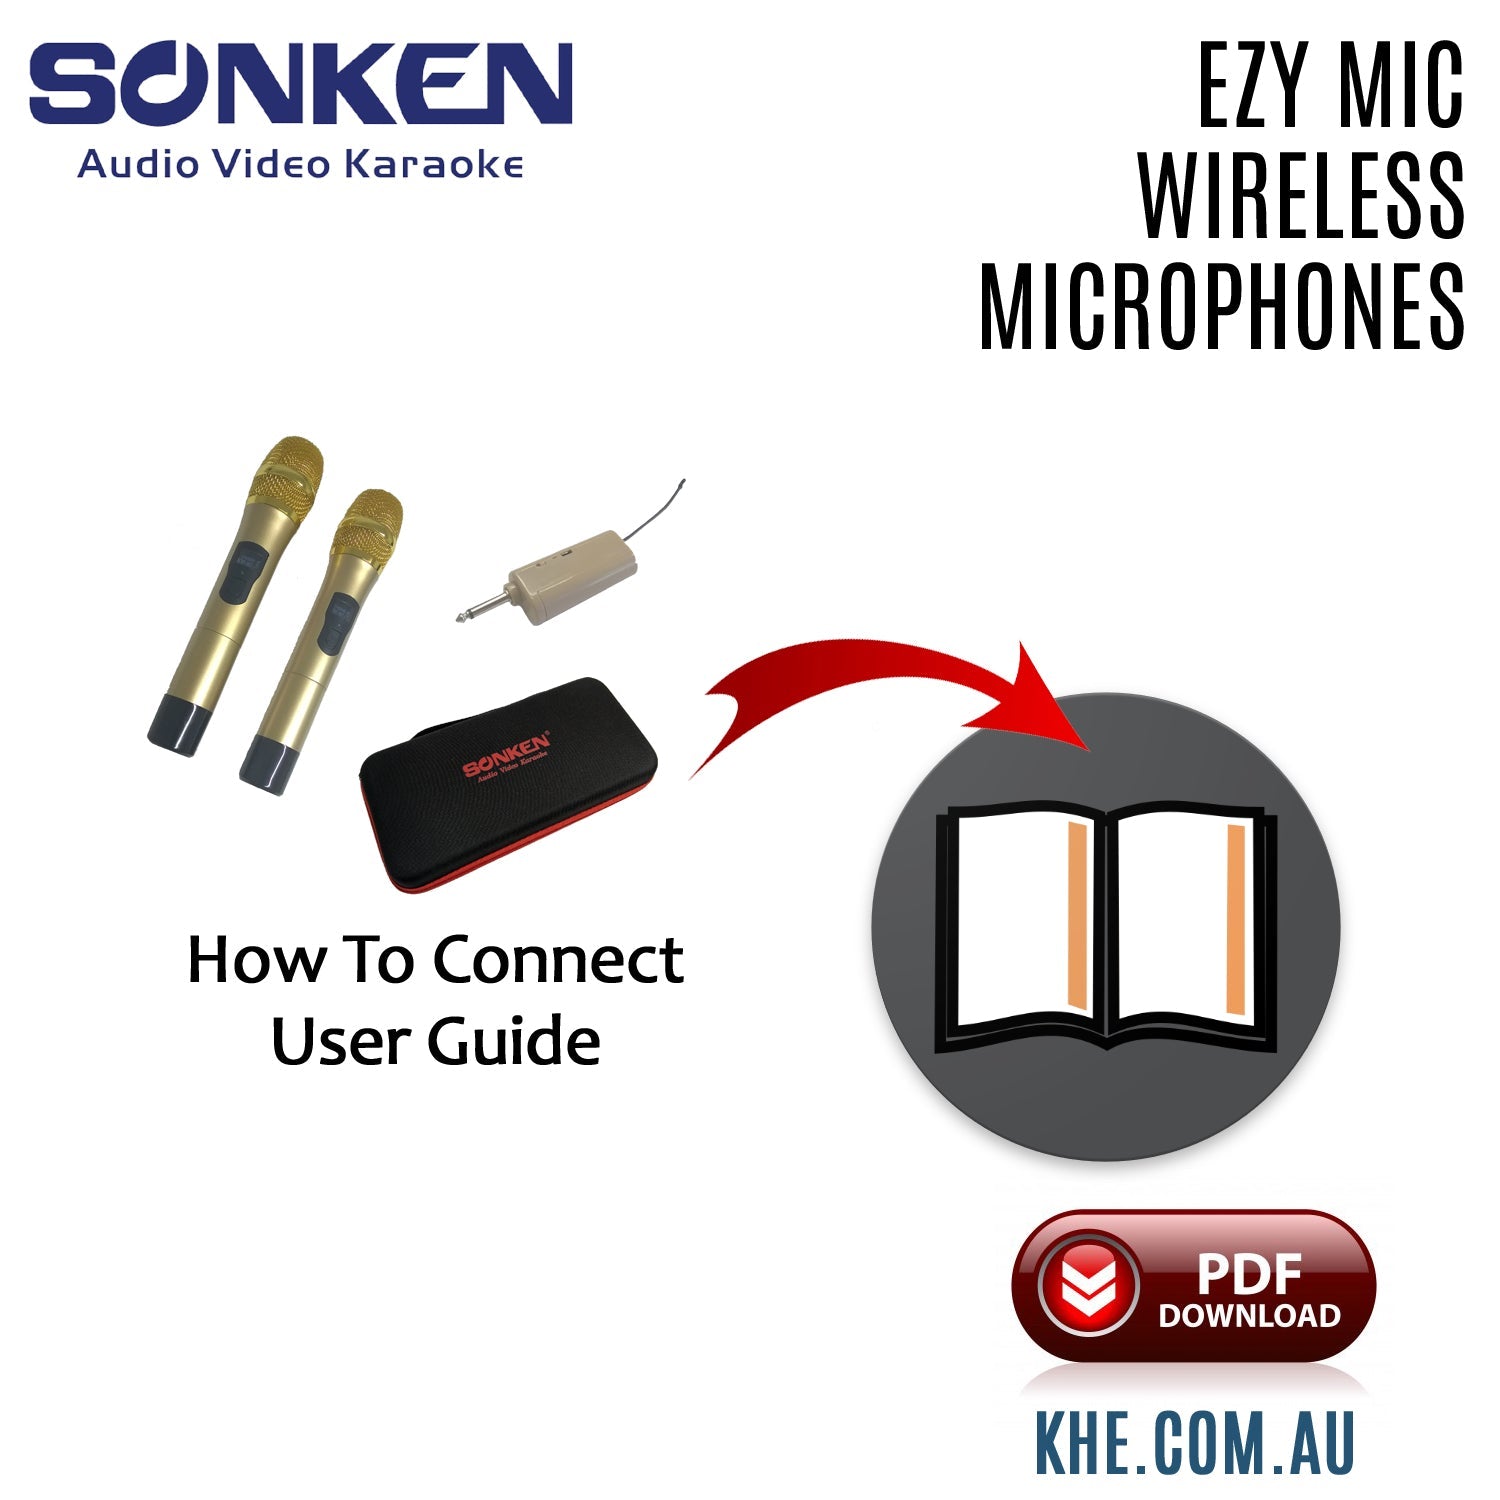 How To Connect Guide - Sonken EZY MIC Wireless Microphones - Karaoke Home Entertainment